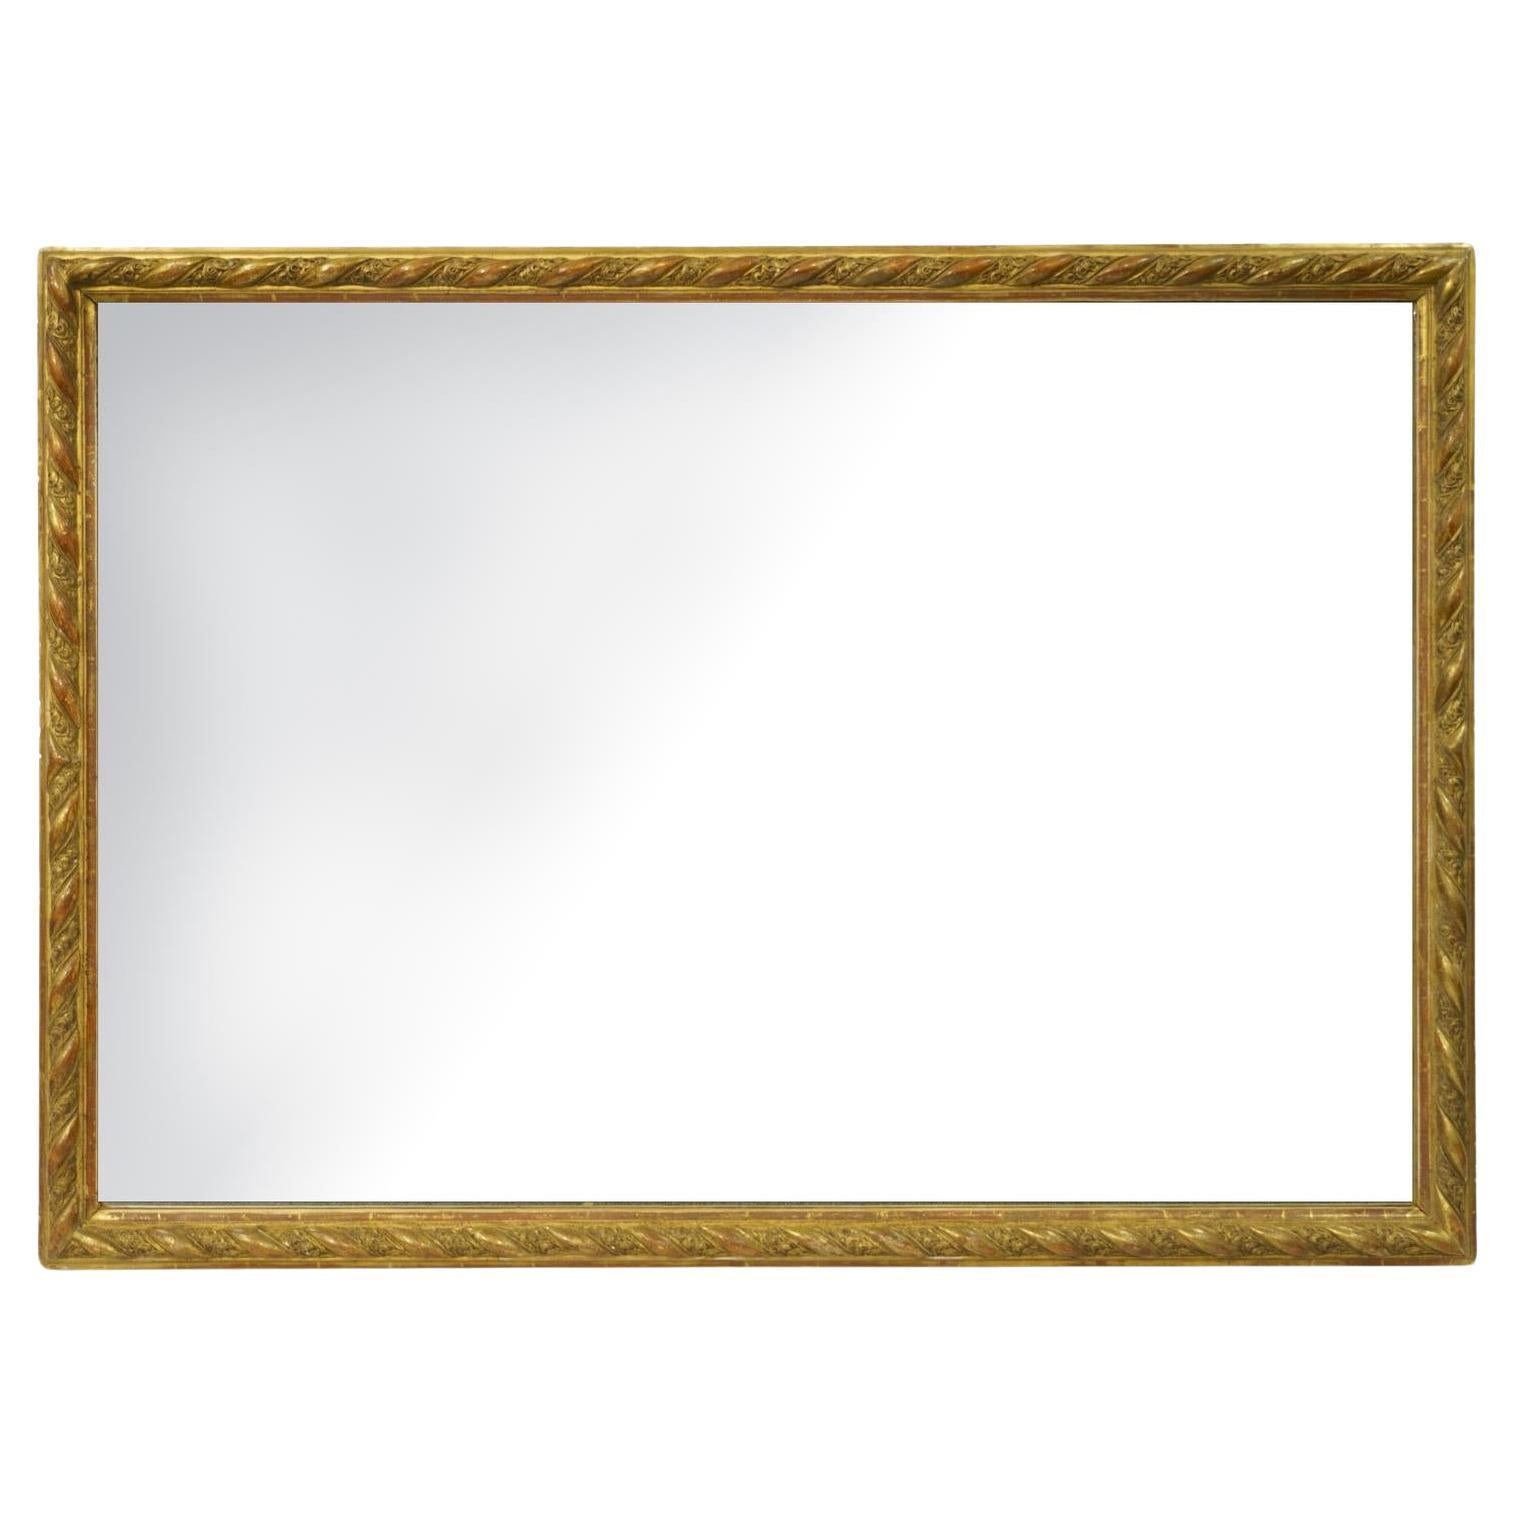 Large Rectangular Shape Continental Giltwood Frame Wall Mirror For Sale